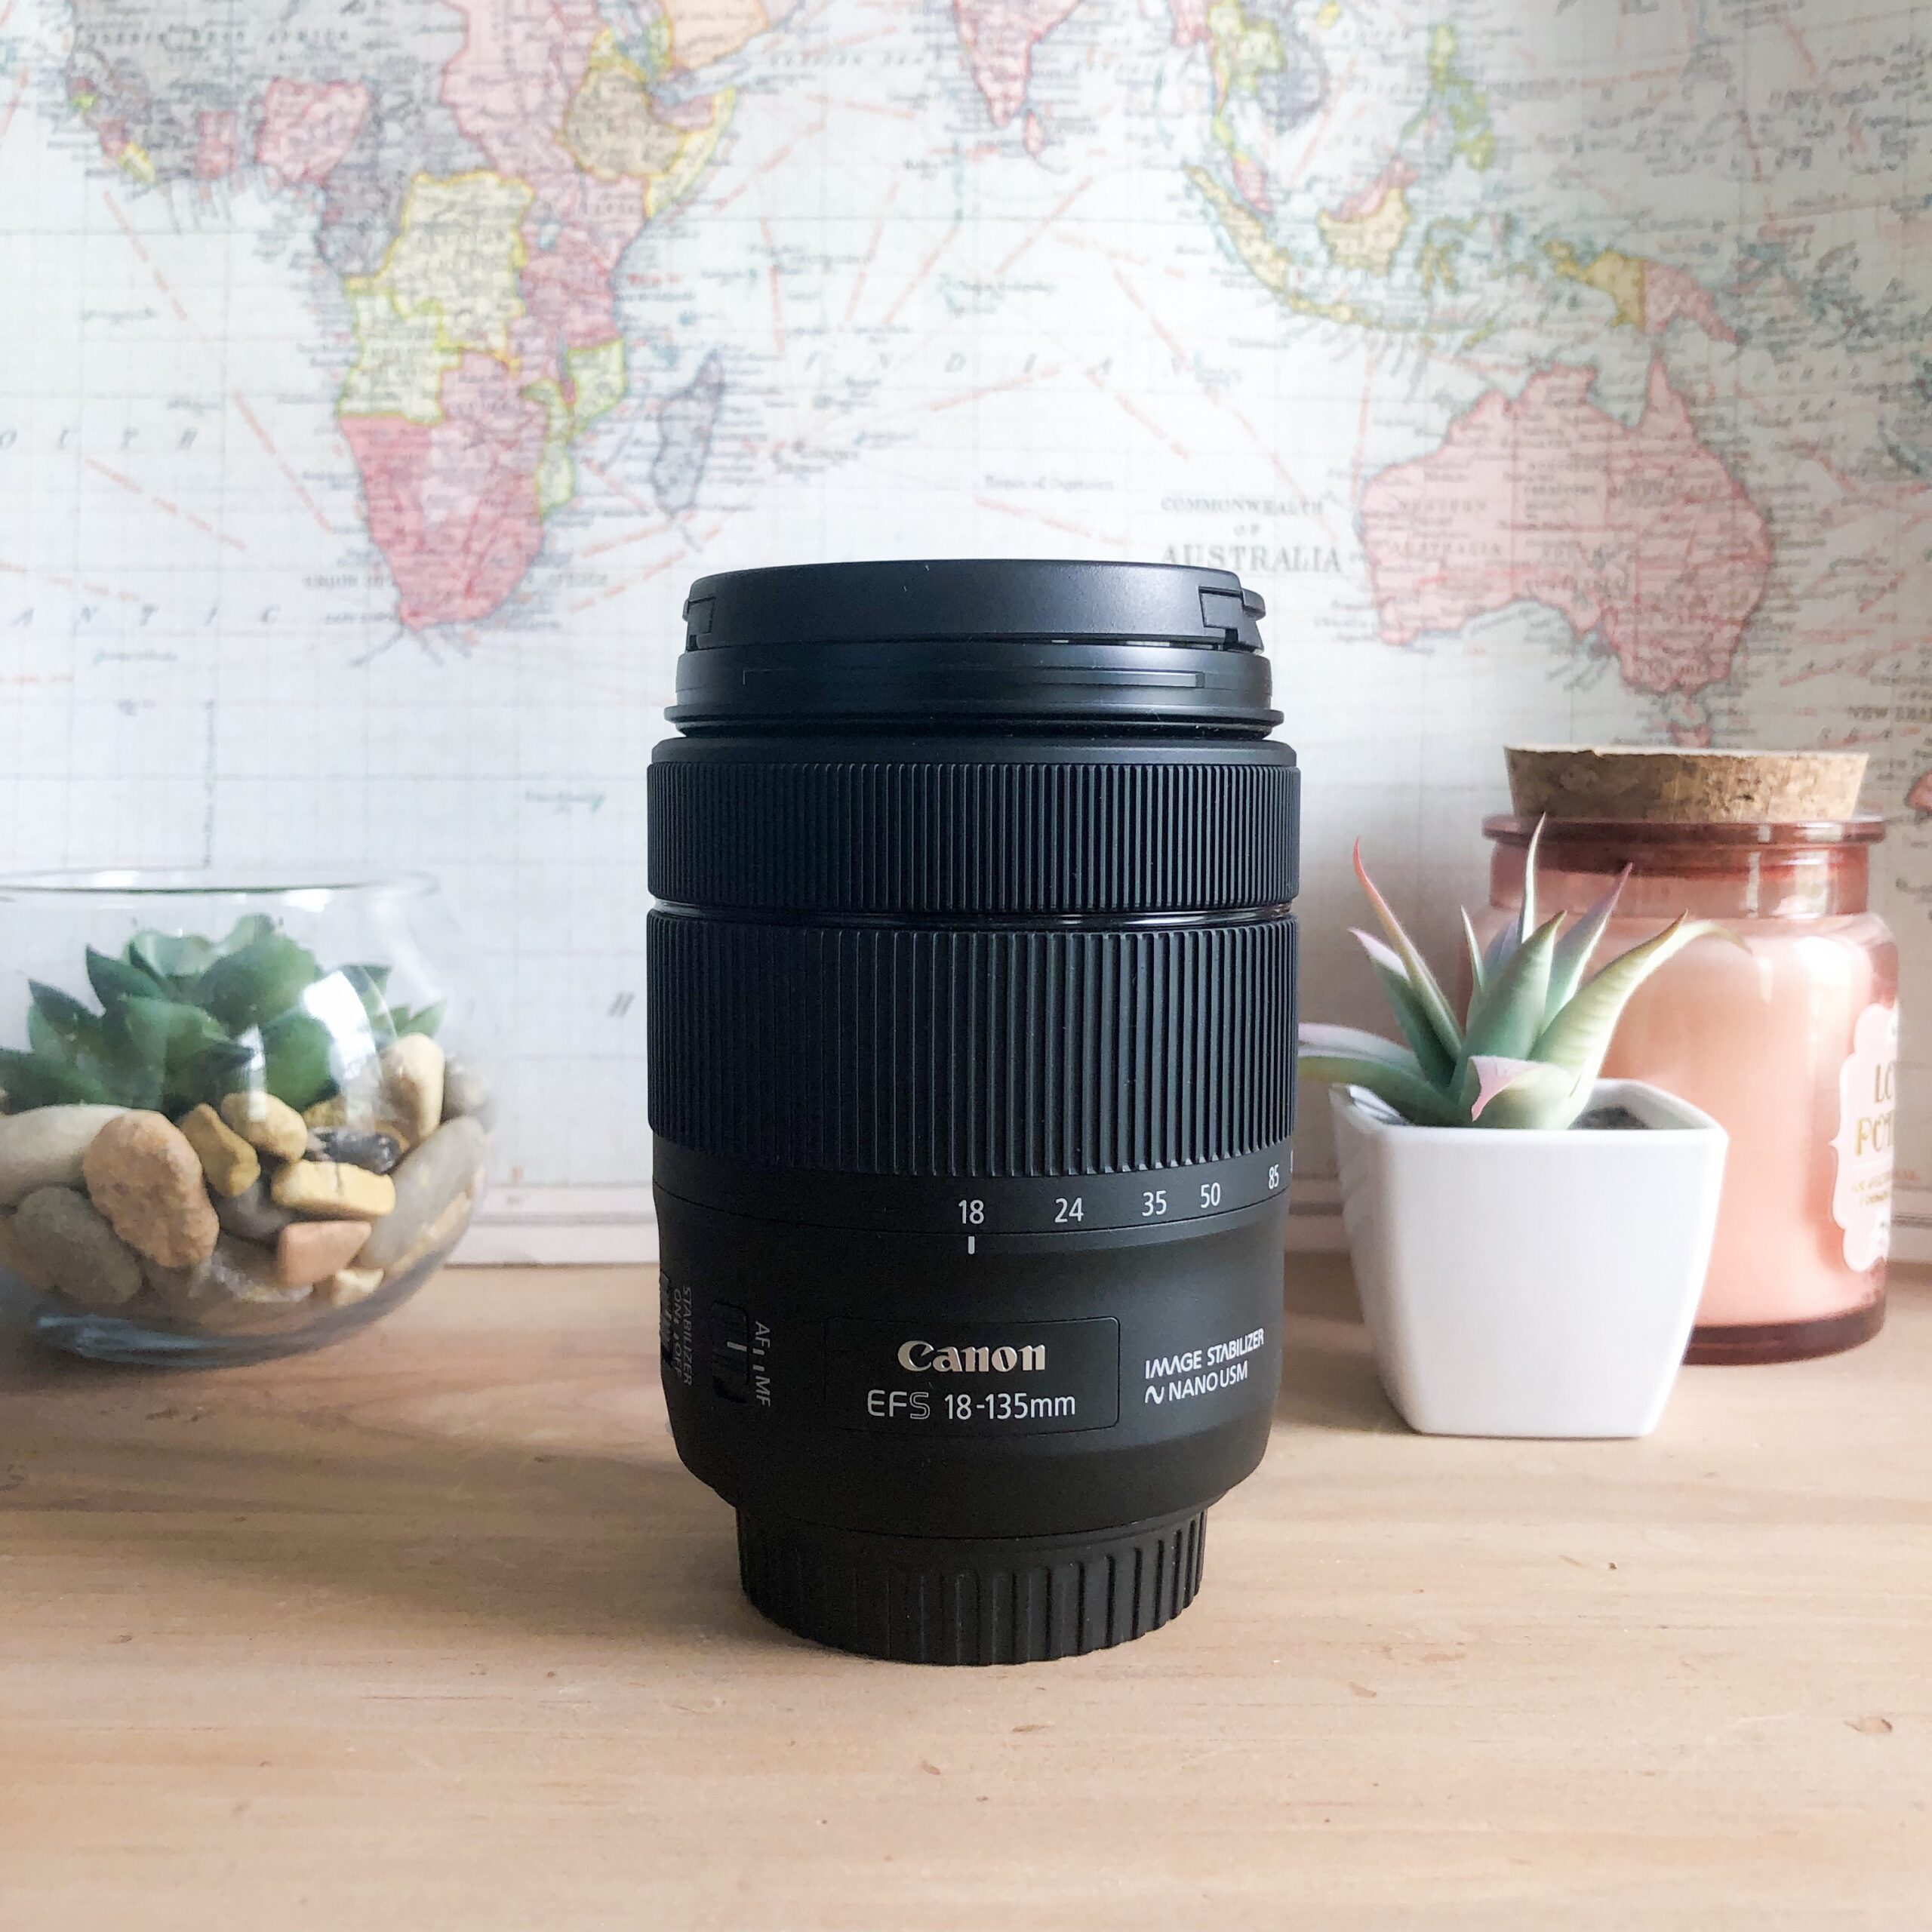 Best Travel Lens Canon 18-135 mm lens with map background